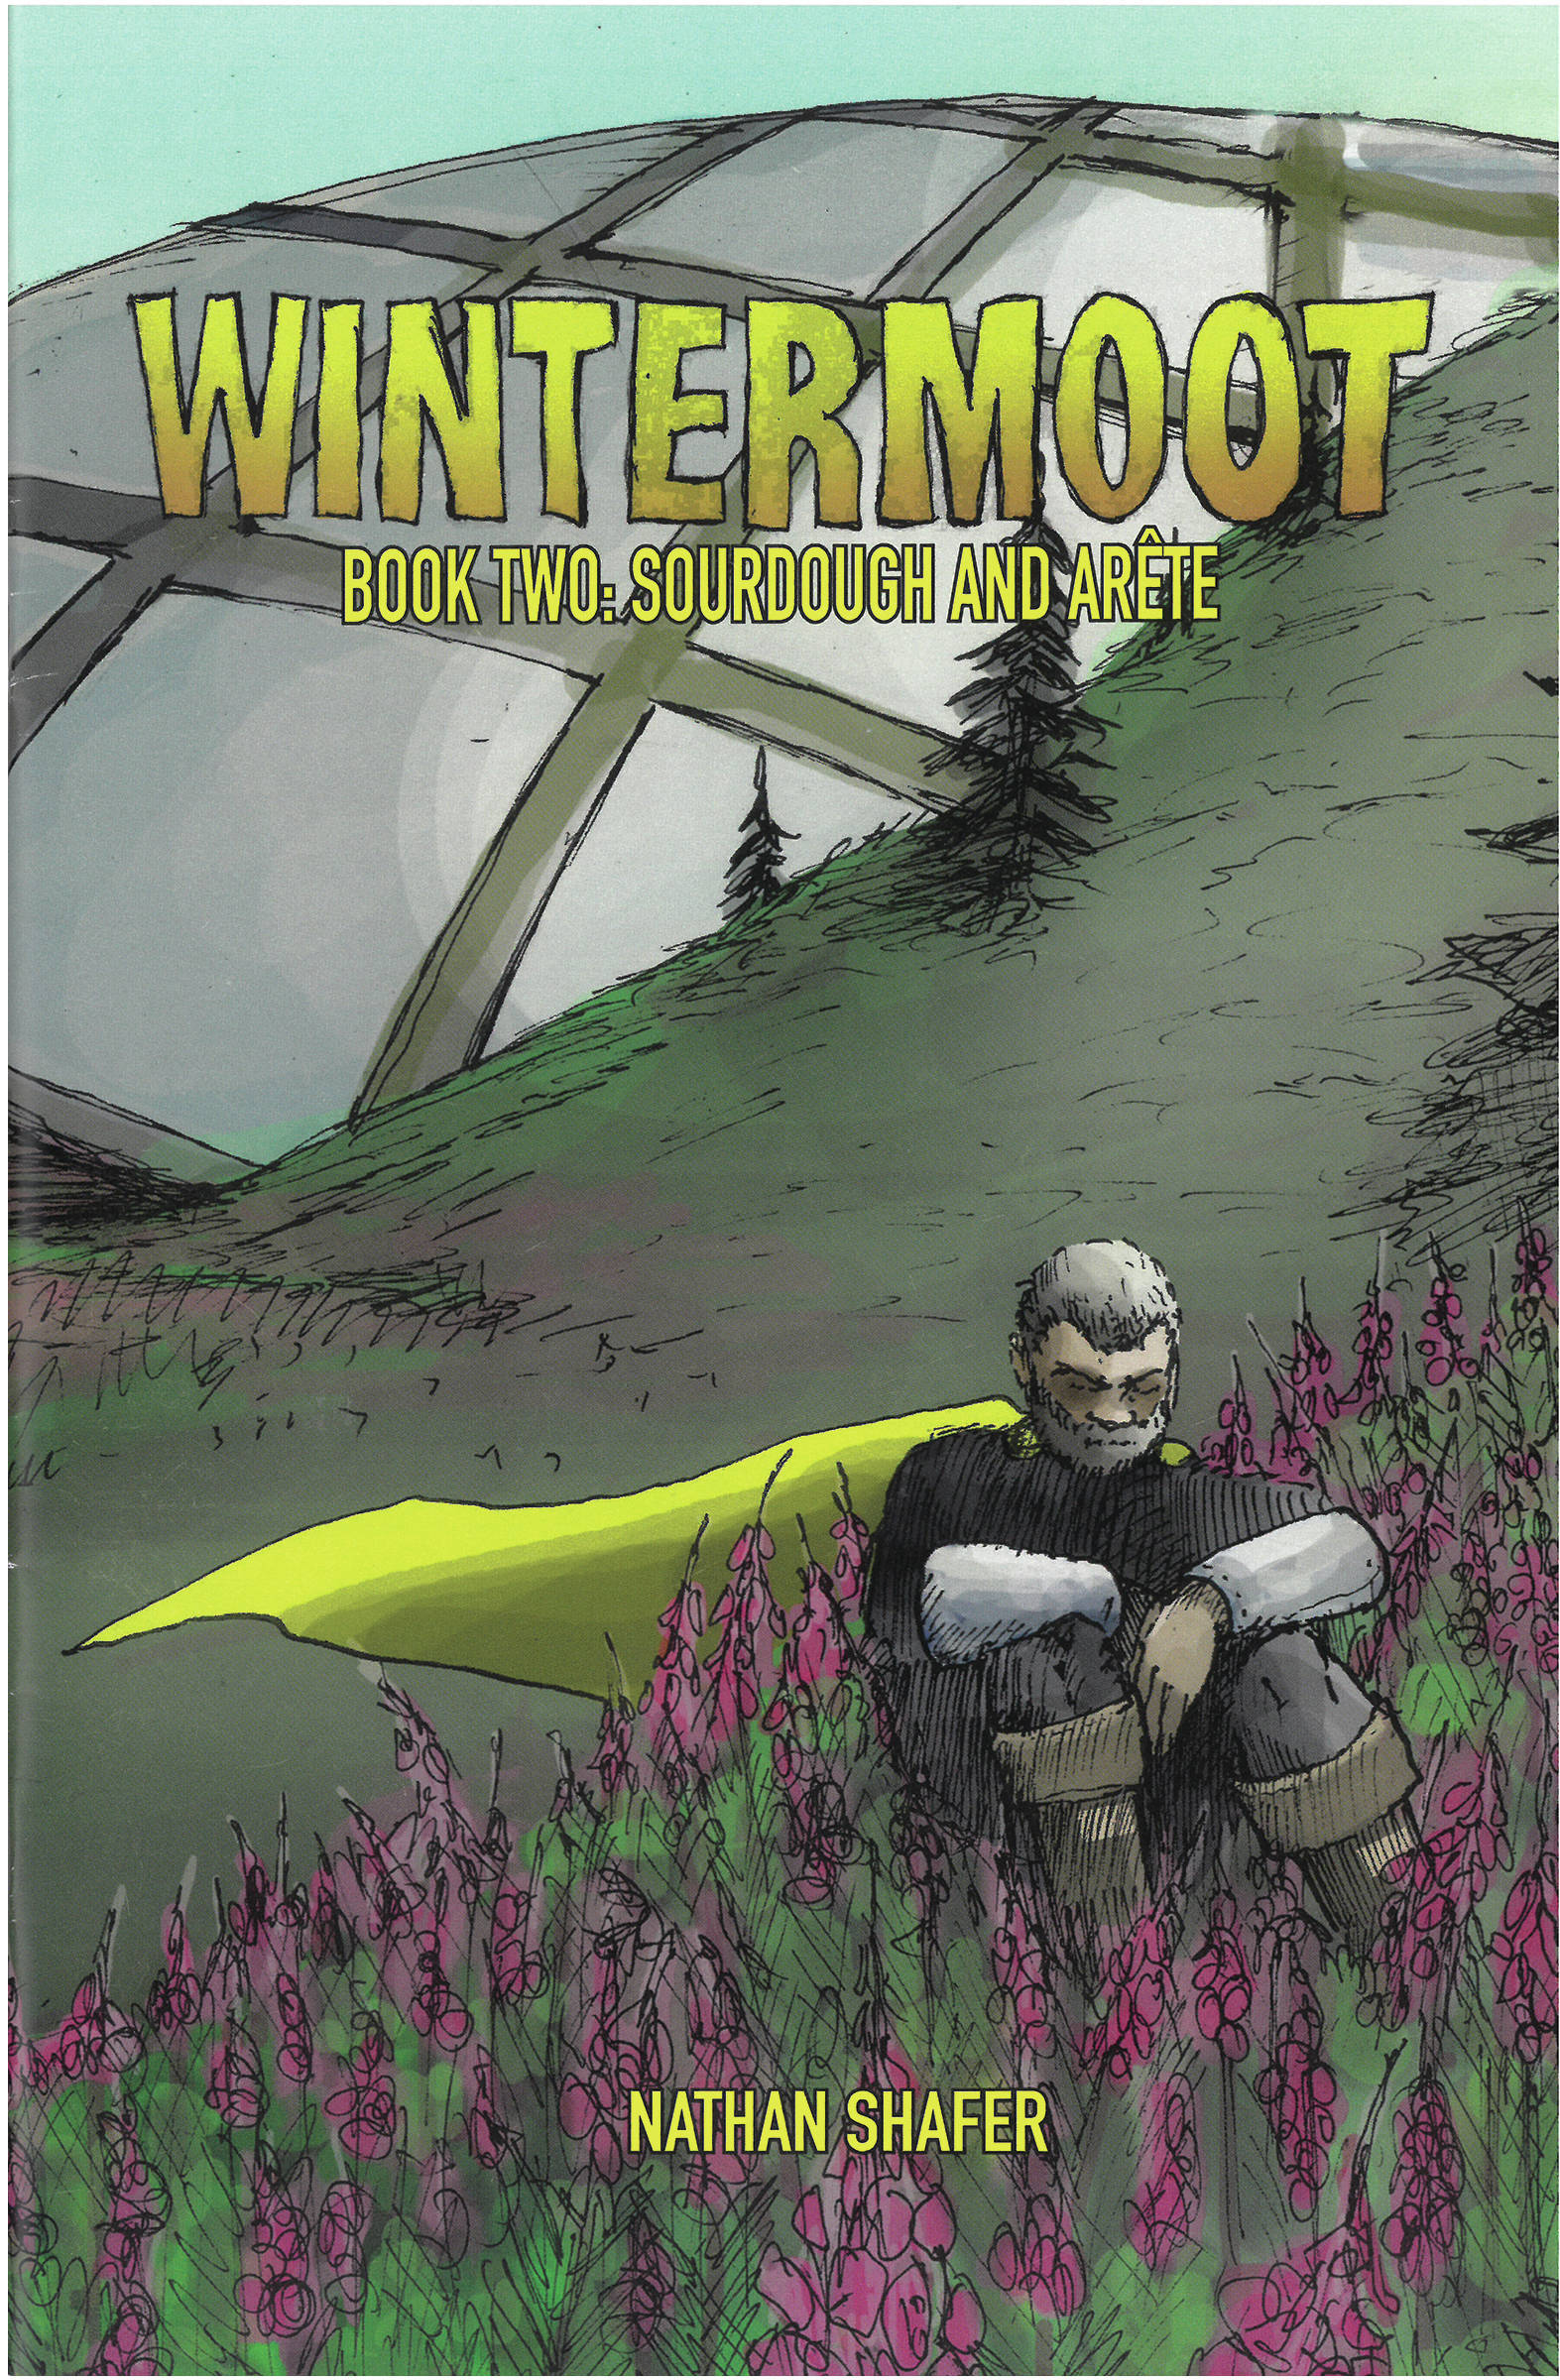 The cover of Nathan Shafer’s “Wintermoot: Book Two: Sourdough and Arete.” (Image courtesy of Nathan Shafer)